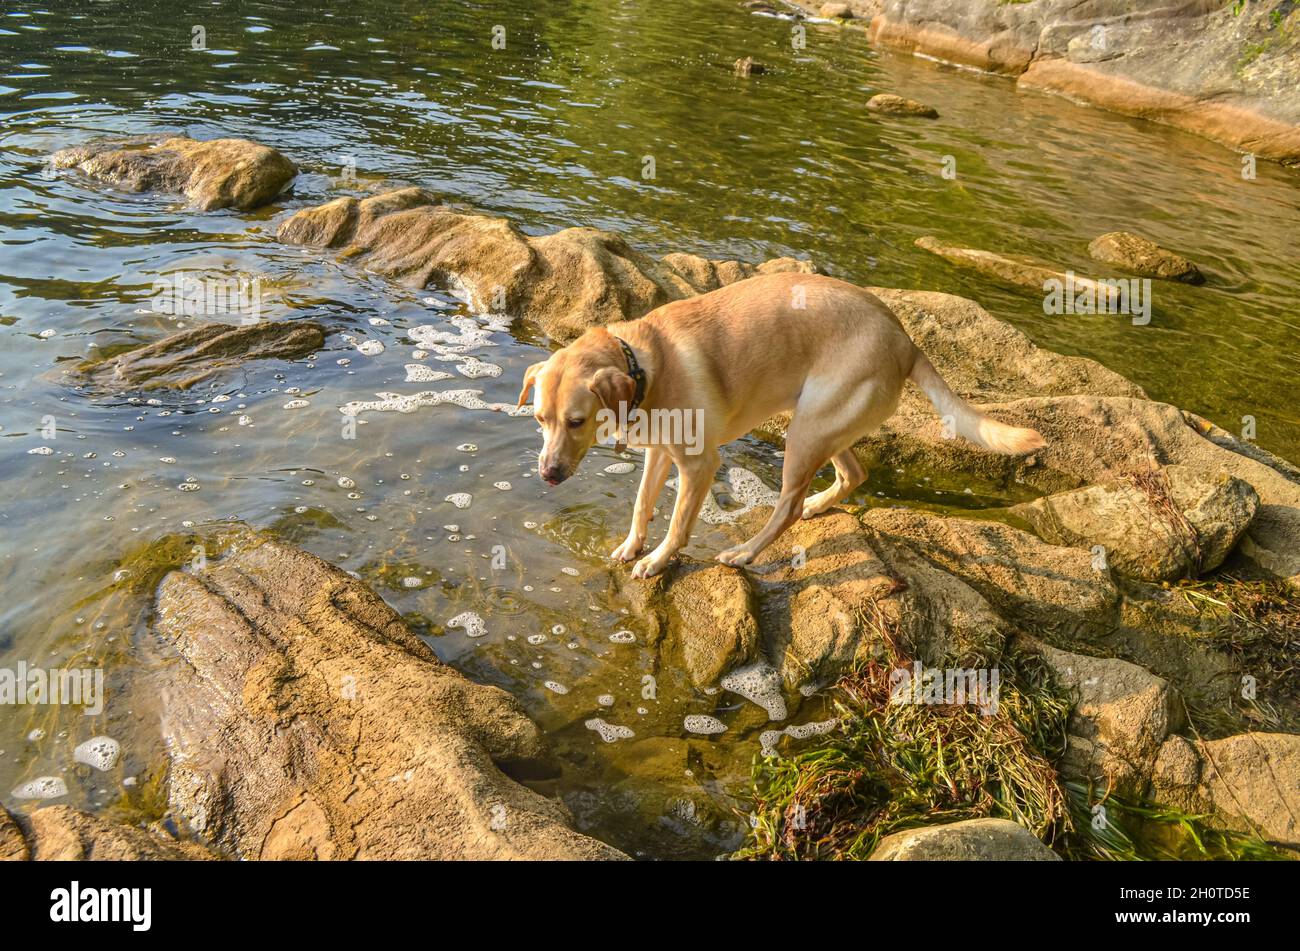 Yellow lab dog navigating slippery rocks at a lakeside.  Copy space. Stock Photo